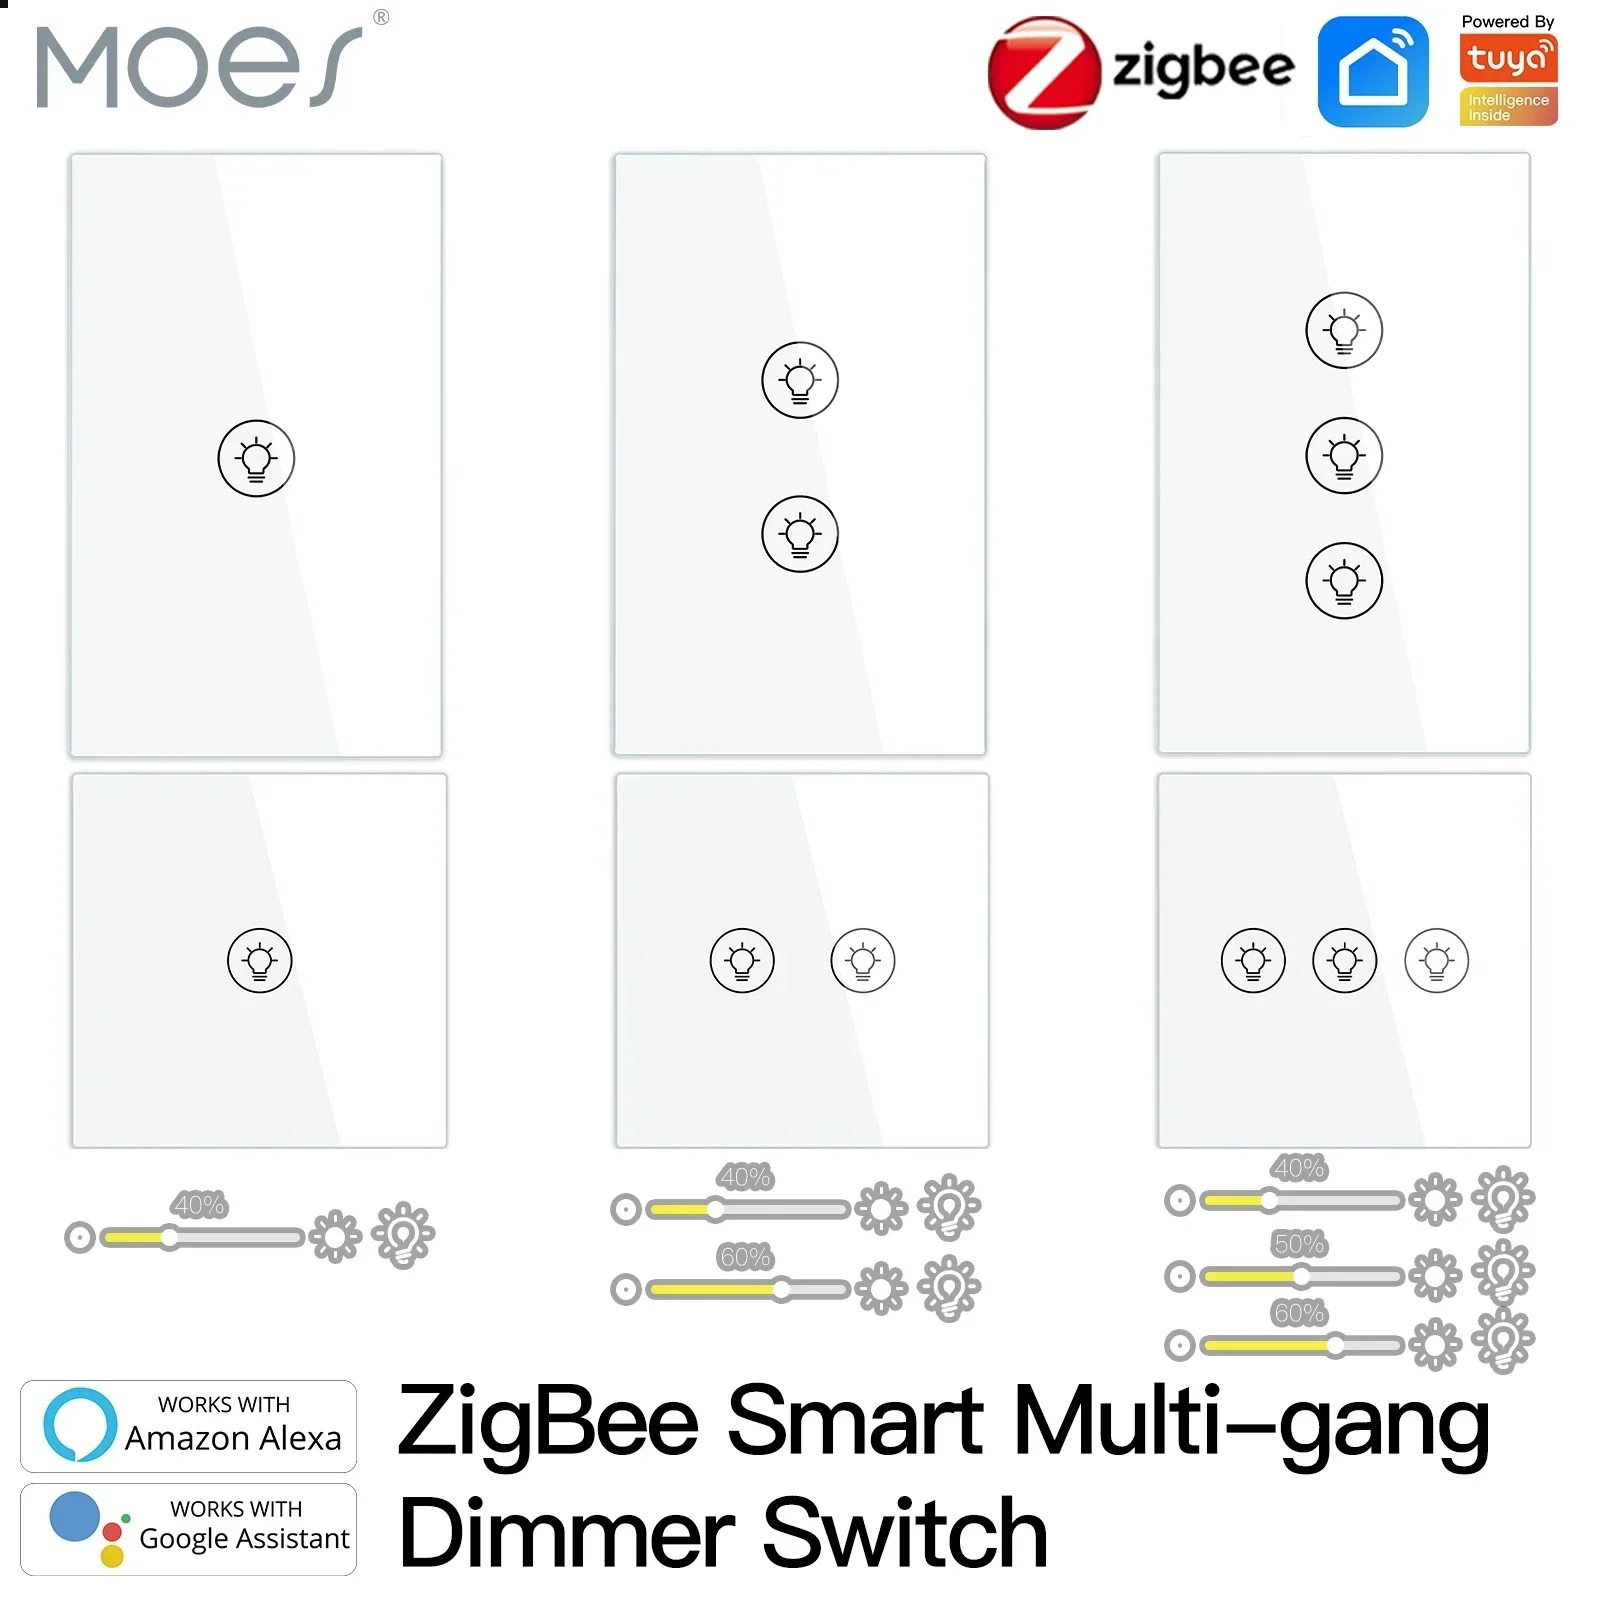 Smart ZigBee Multi-gang Light Dimmer Switch Independent Control Smart Tuya APP Control Works with Alexa Google Home 1/2/3 Gang 52 smart ceiling fan with light 10 speed 8 hours timer works with remote control alexa google home siri